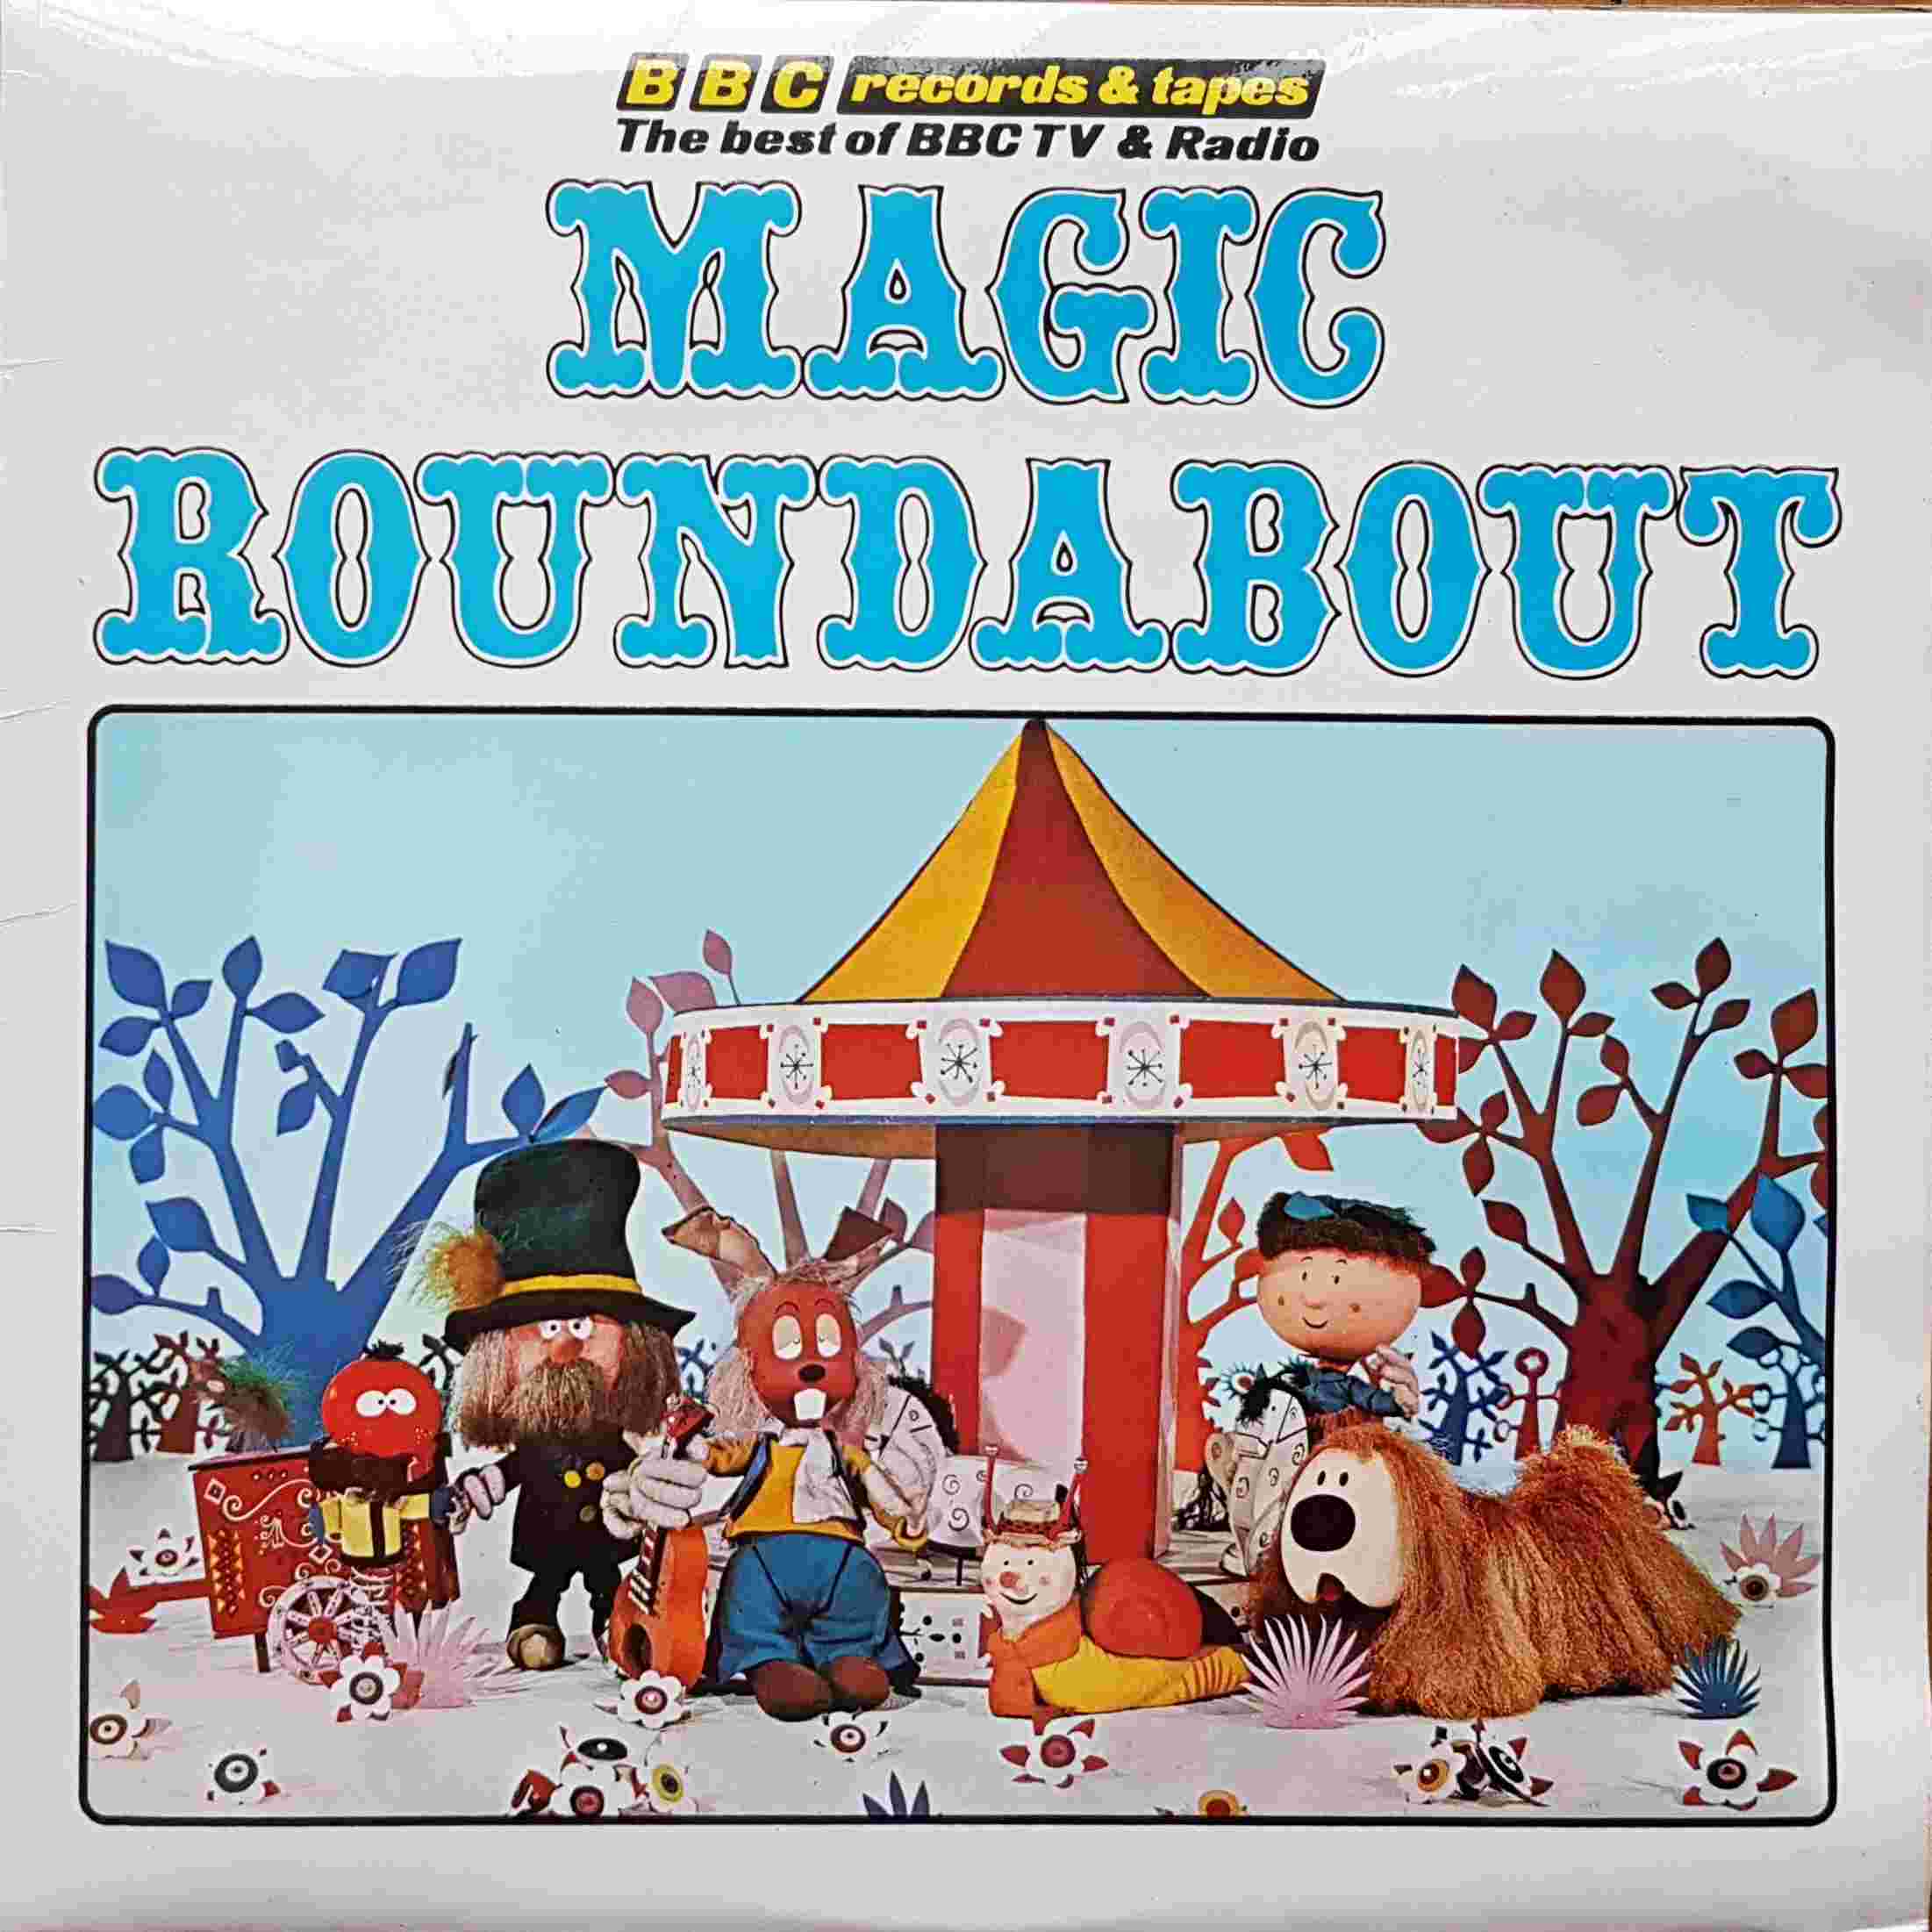 Picture of REC 243 The magic roundabout by artist Eric Thompson from the BBC albums - Records and Tapes library